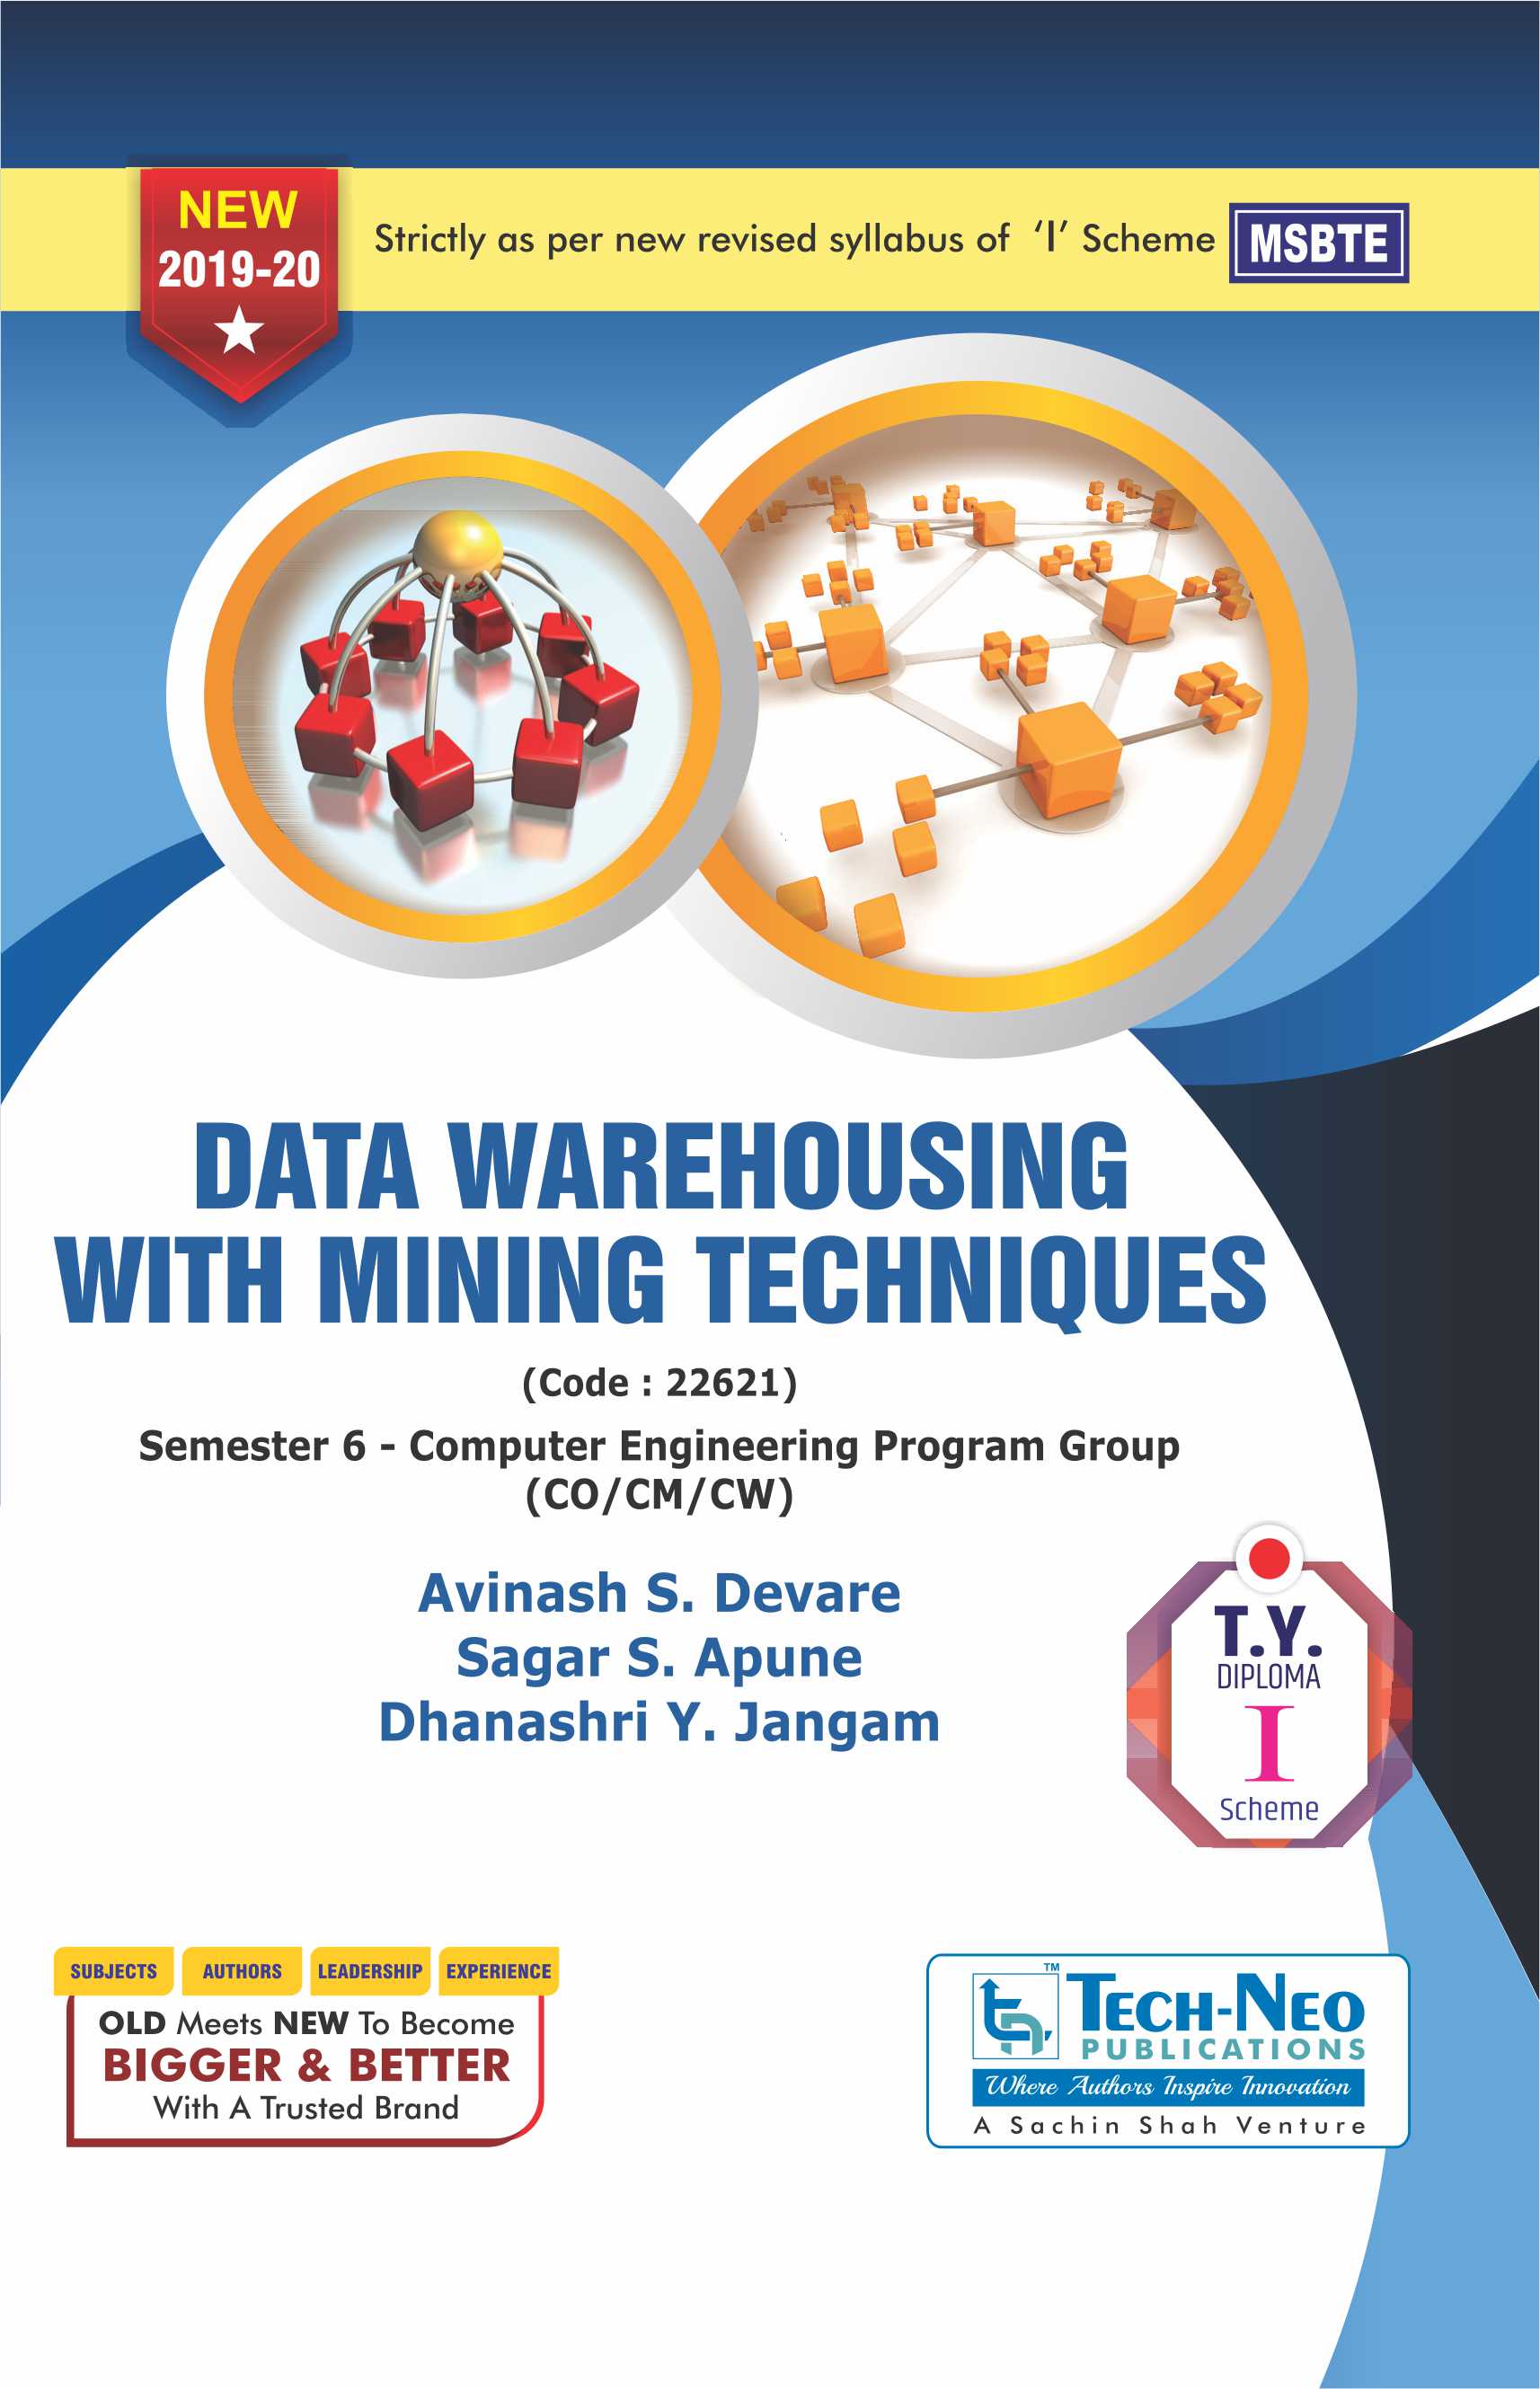 Data Warehousing and Mining Techniques